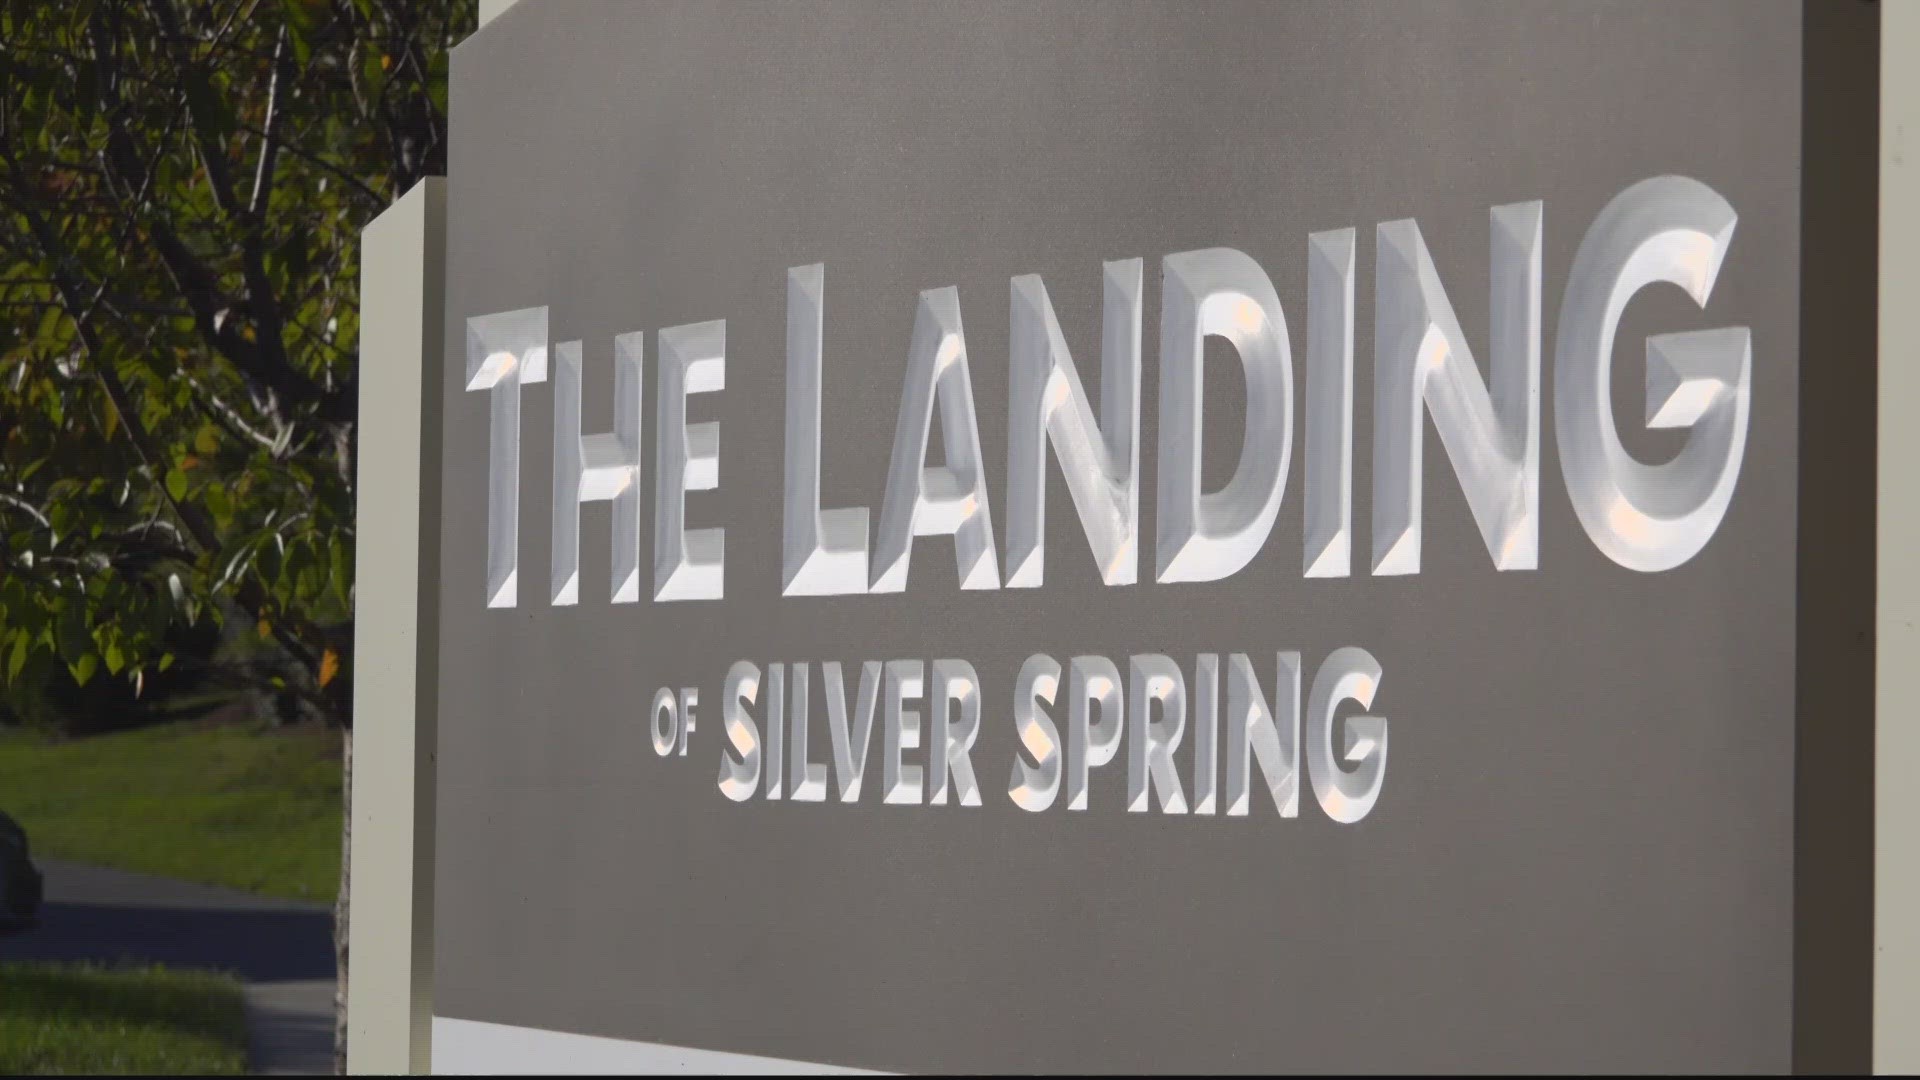 Residents have until November 15 to leave The Landing of Silver Spring.